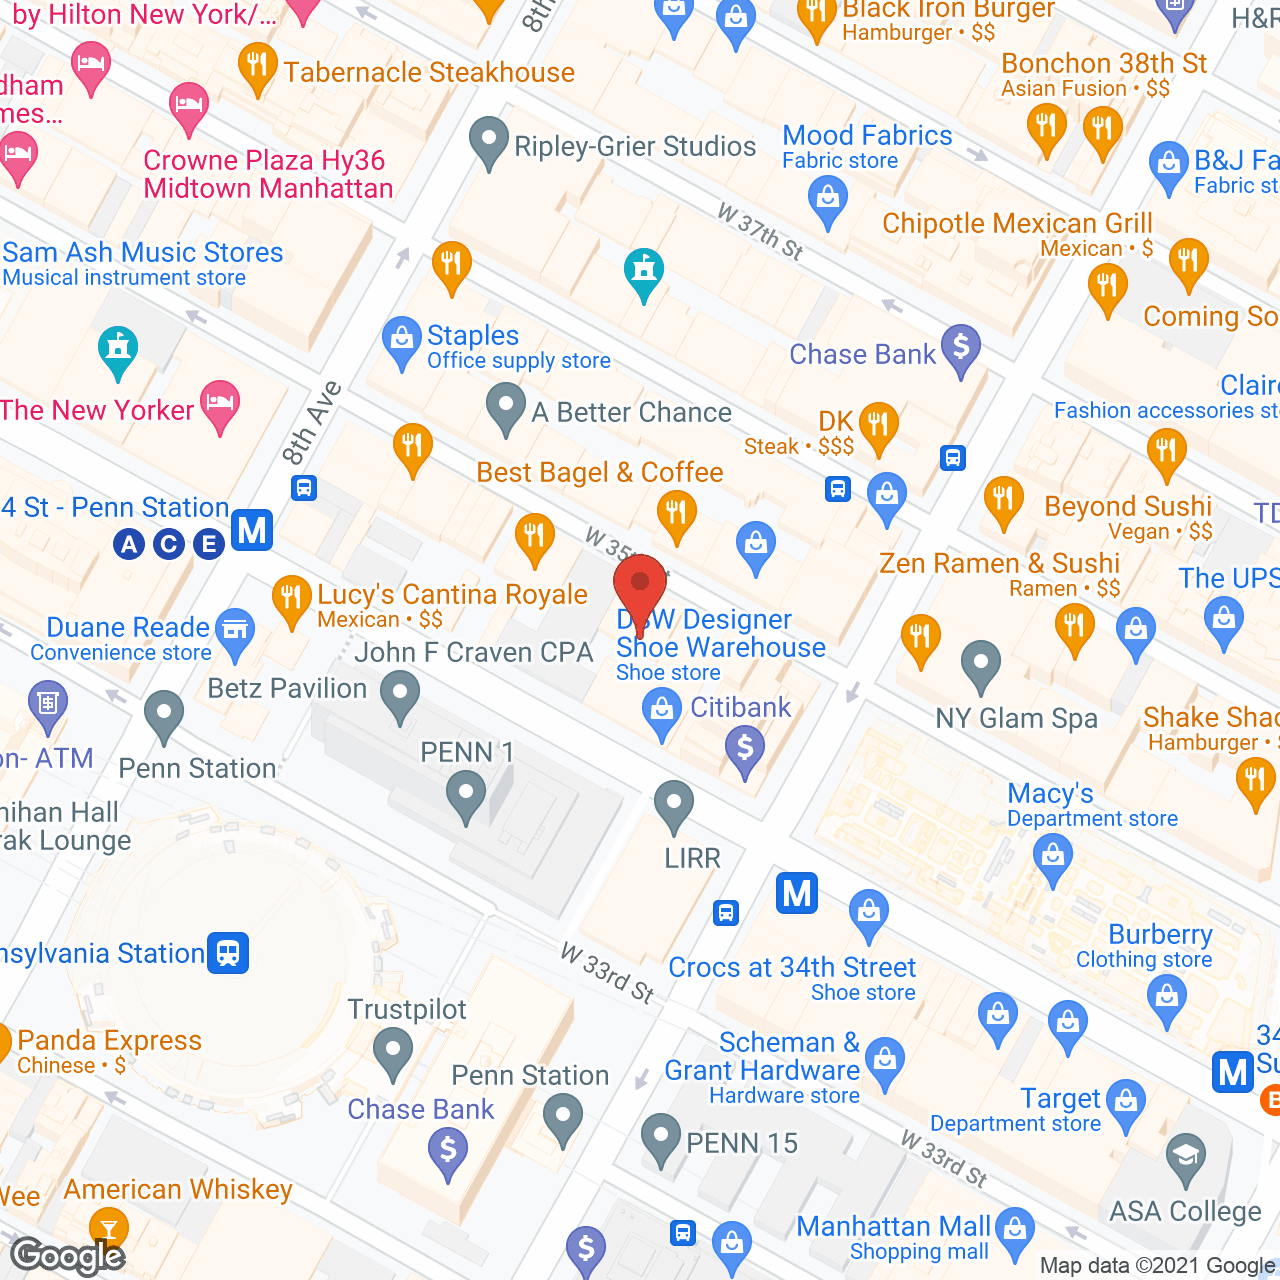 Xincon Home Healthcare Services Inc. in google map